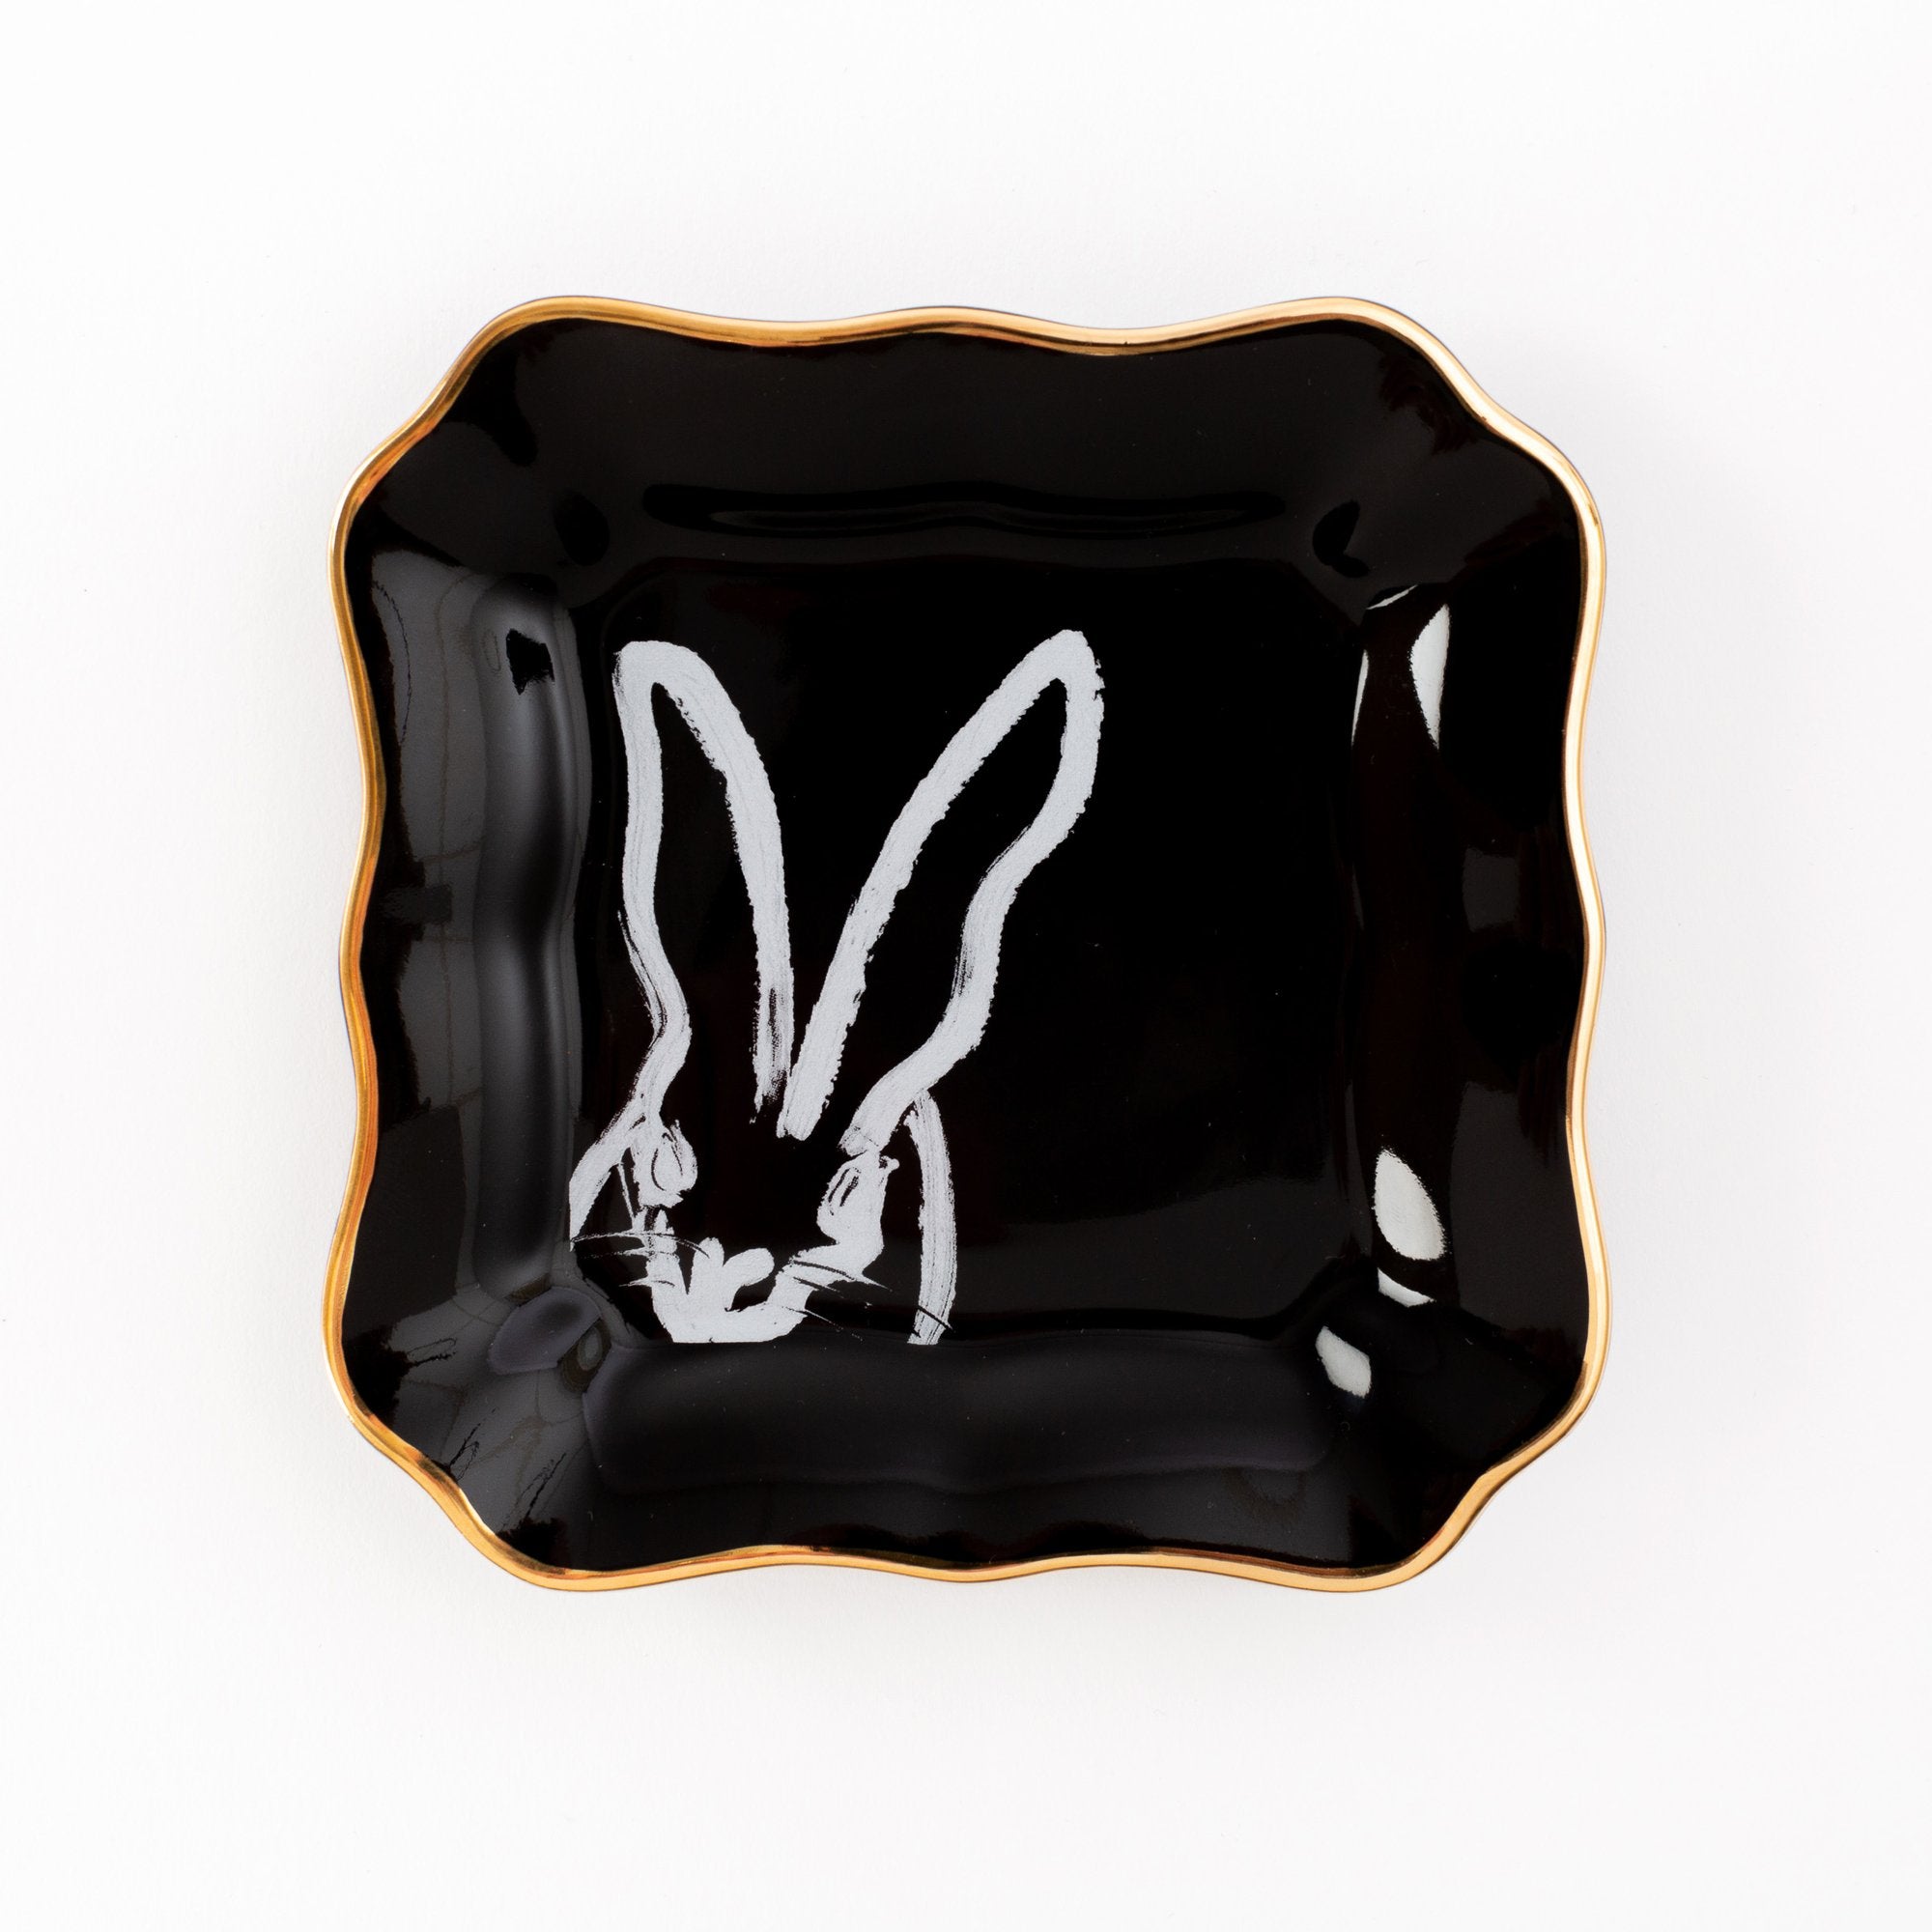 Bunny Portrait Plates: Black with Gold